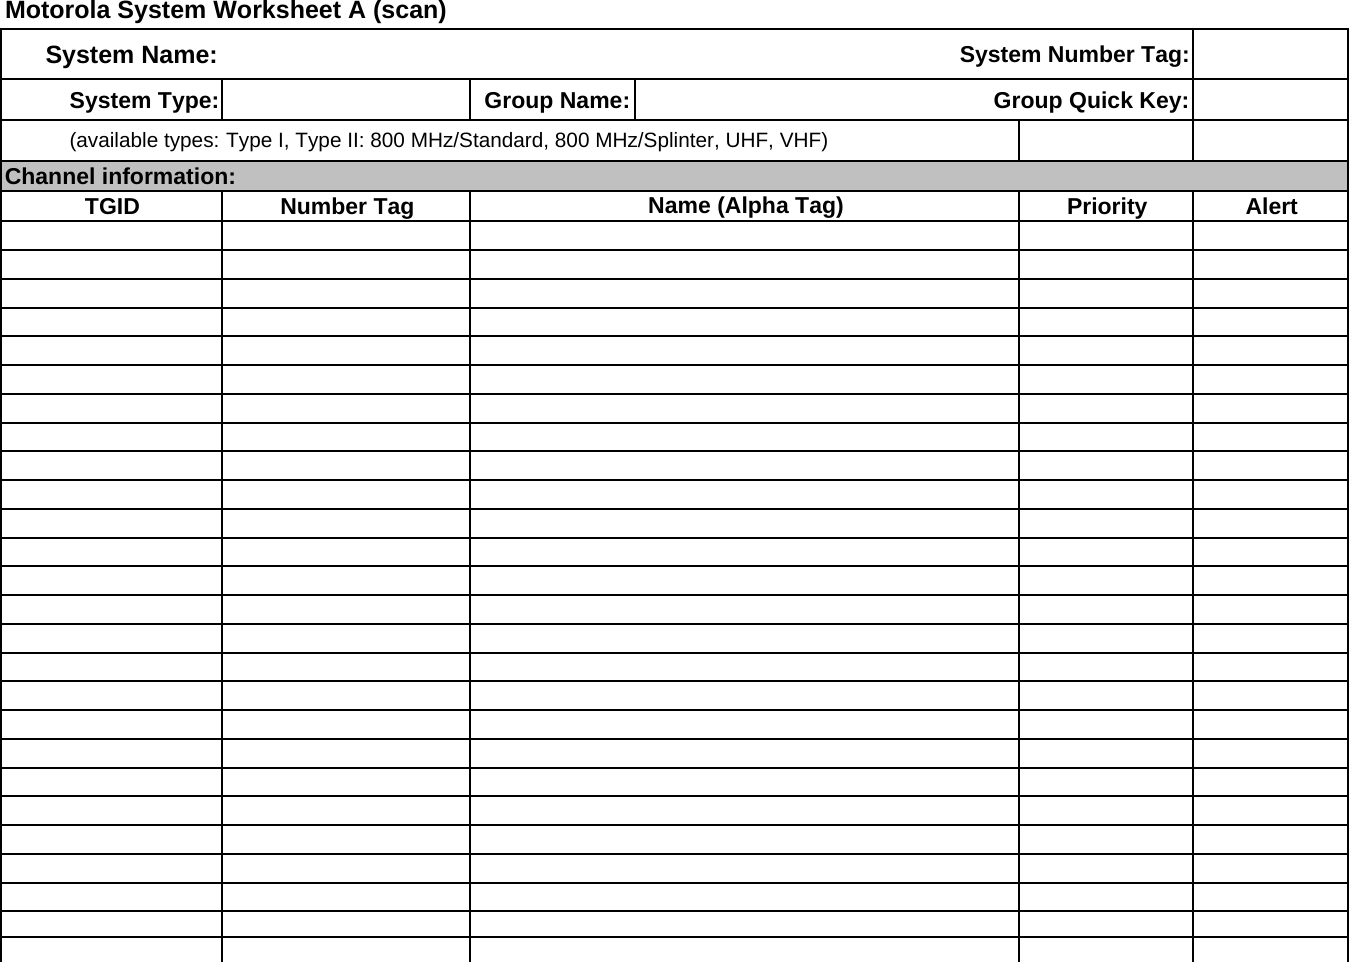 Motorola System Worksheet A (scan)System Name: System Number Tag:System Type: Group Name: Group Quick Key:(available types: Type I, Type II: 800 MHz/Standard, 800 MHz/Splinter, UHF, VHF)Channel information:TGID Number Tag Name (Alpha Tag) Priority Alert